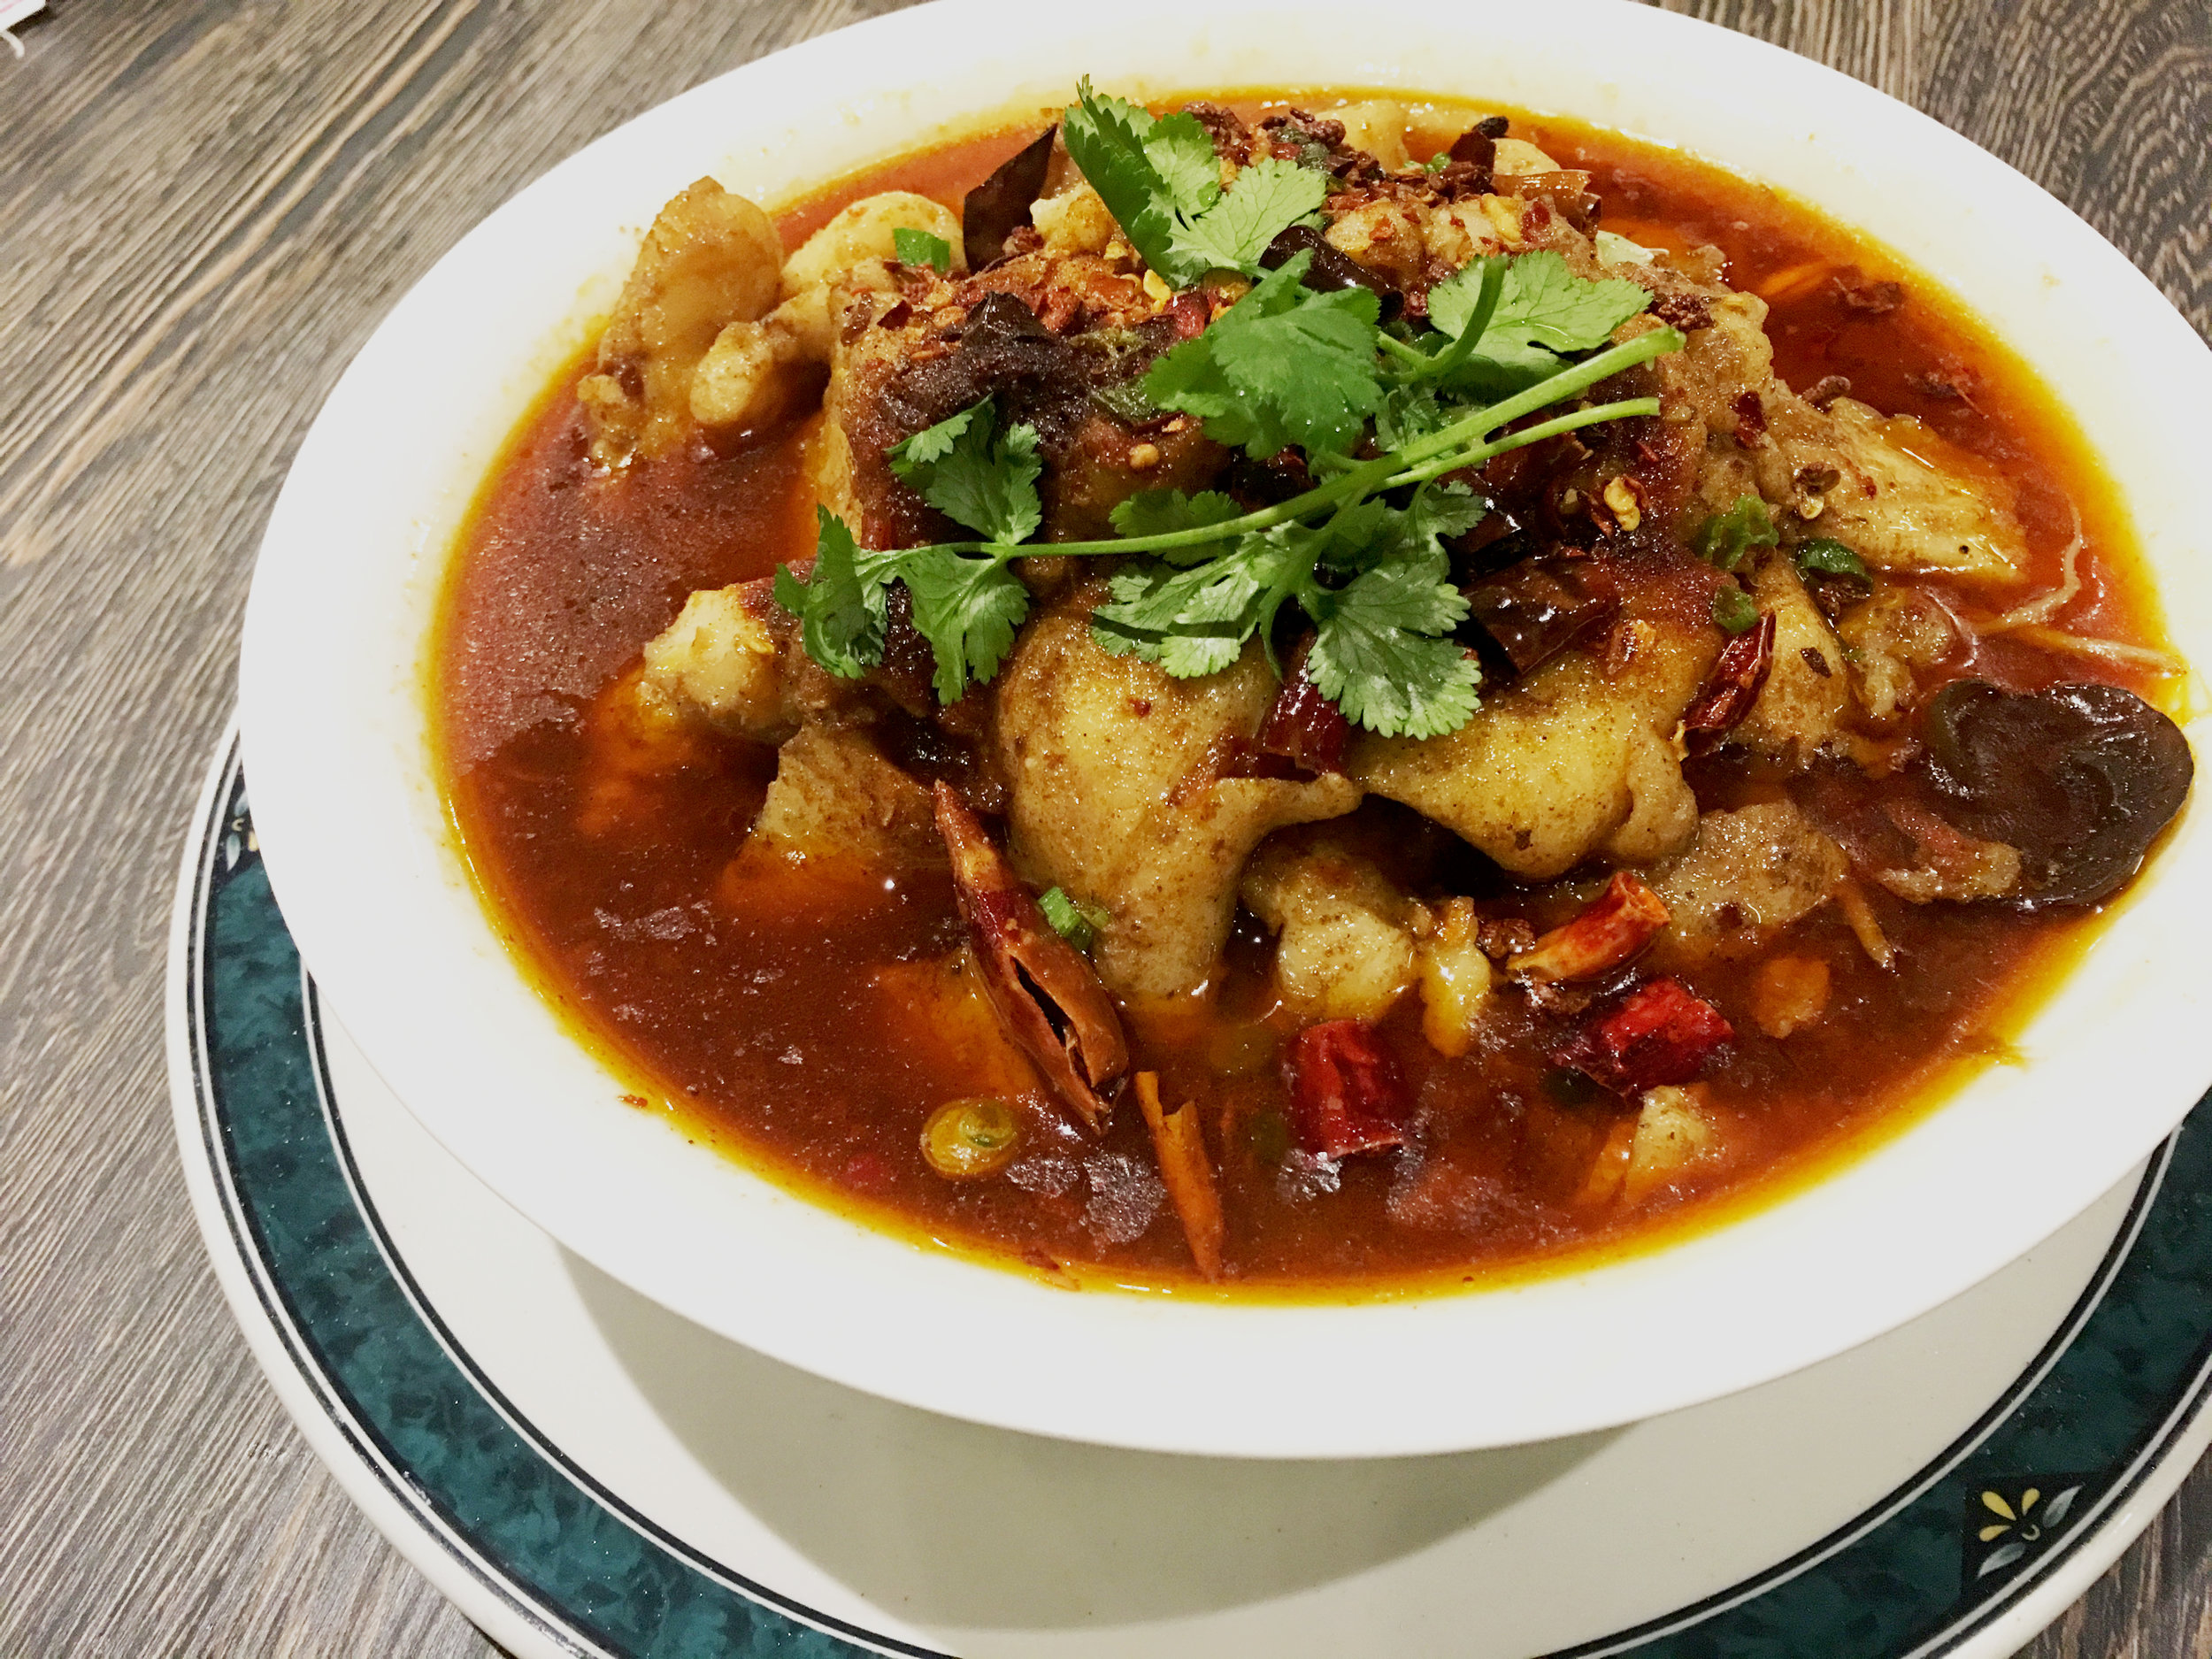  SICHUAN-STYLE BOILED FISH | 水煮魚 